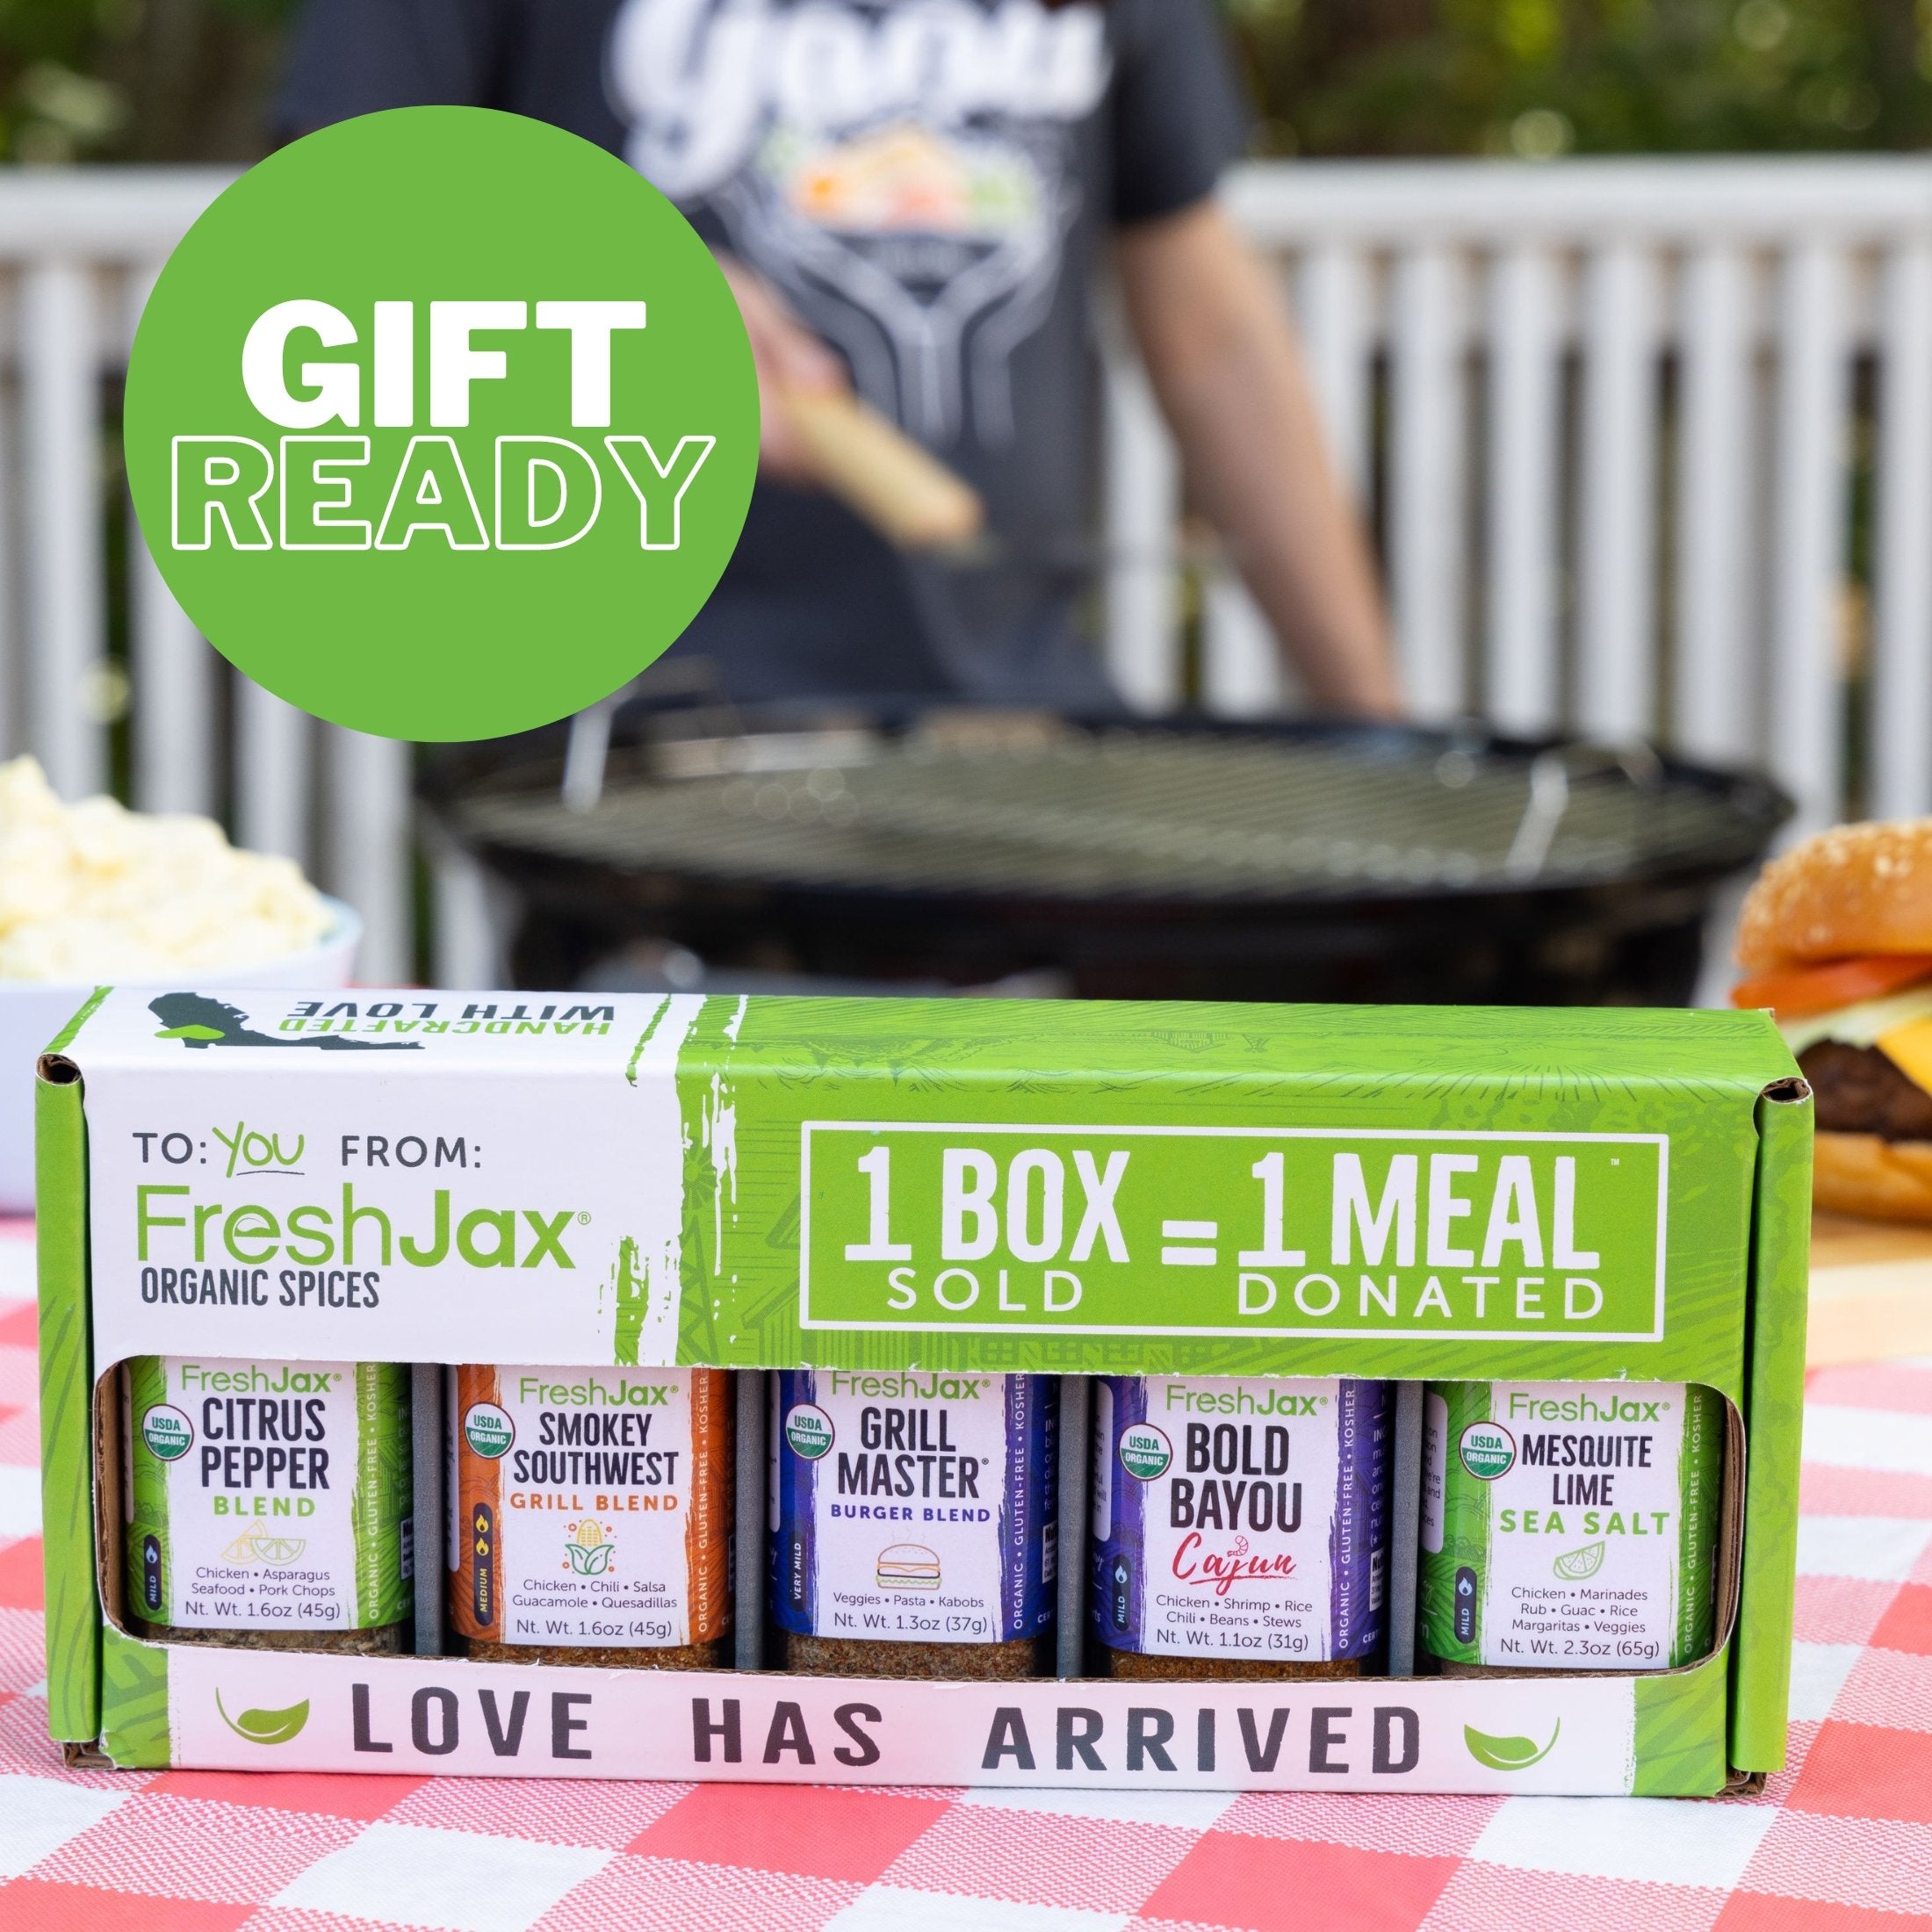 FreshJax Organic Spices Grill and BBQ 6-Pack in a gift box on a picnic table